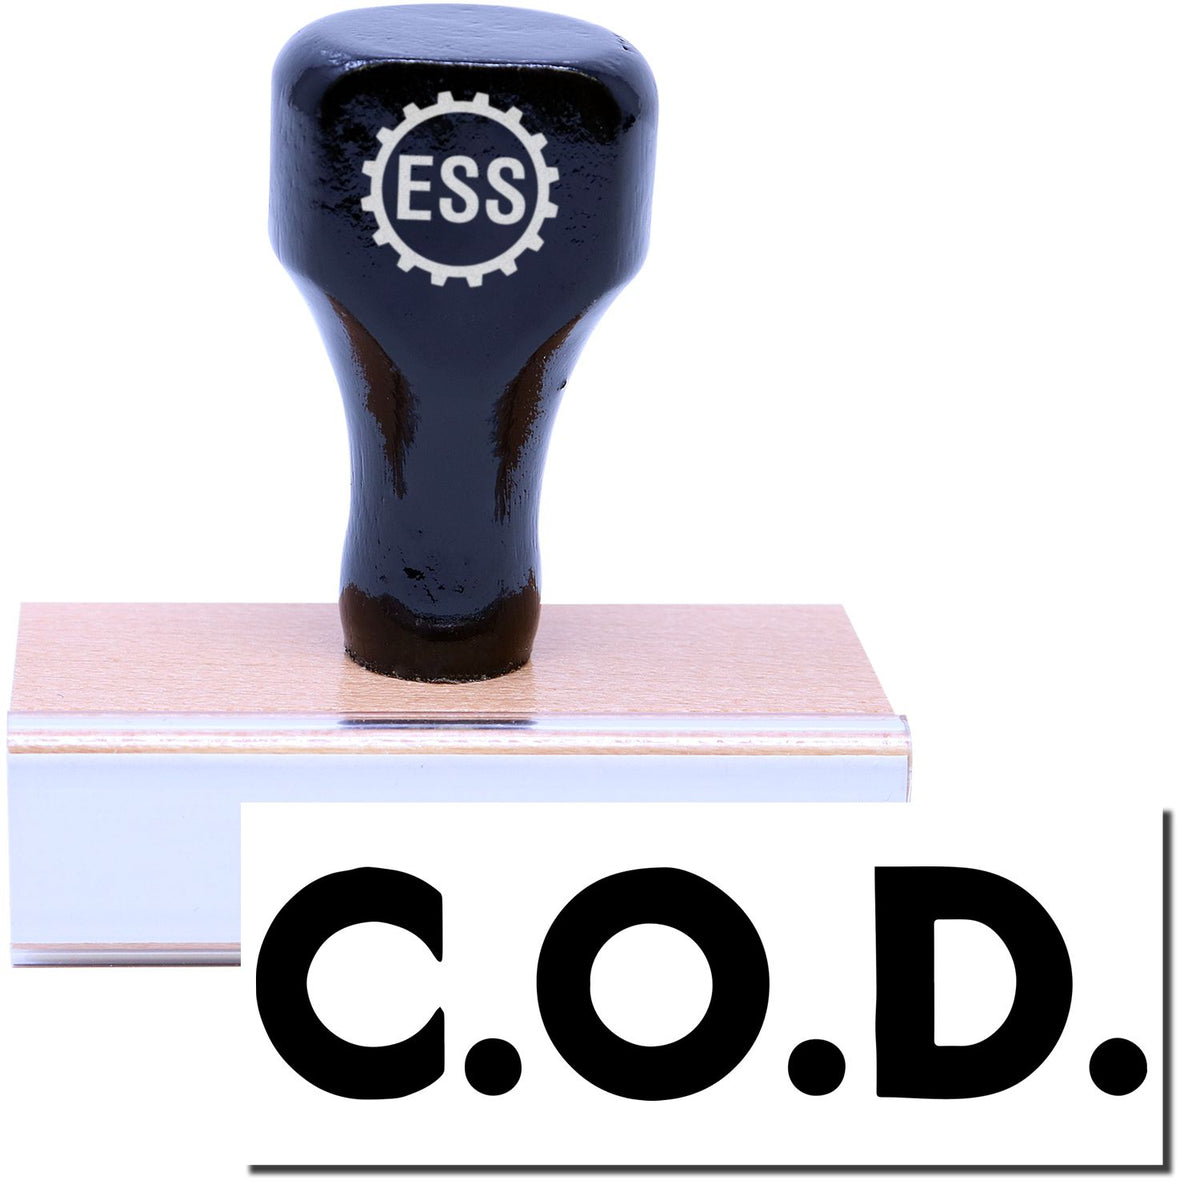 A stock office rubber stamp with a stamped image showing how the text &quot;C.O.D.&quot; in bold font is displayed after stamping.